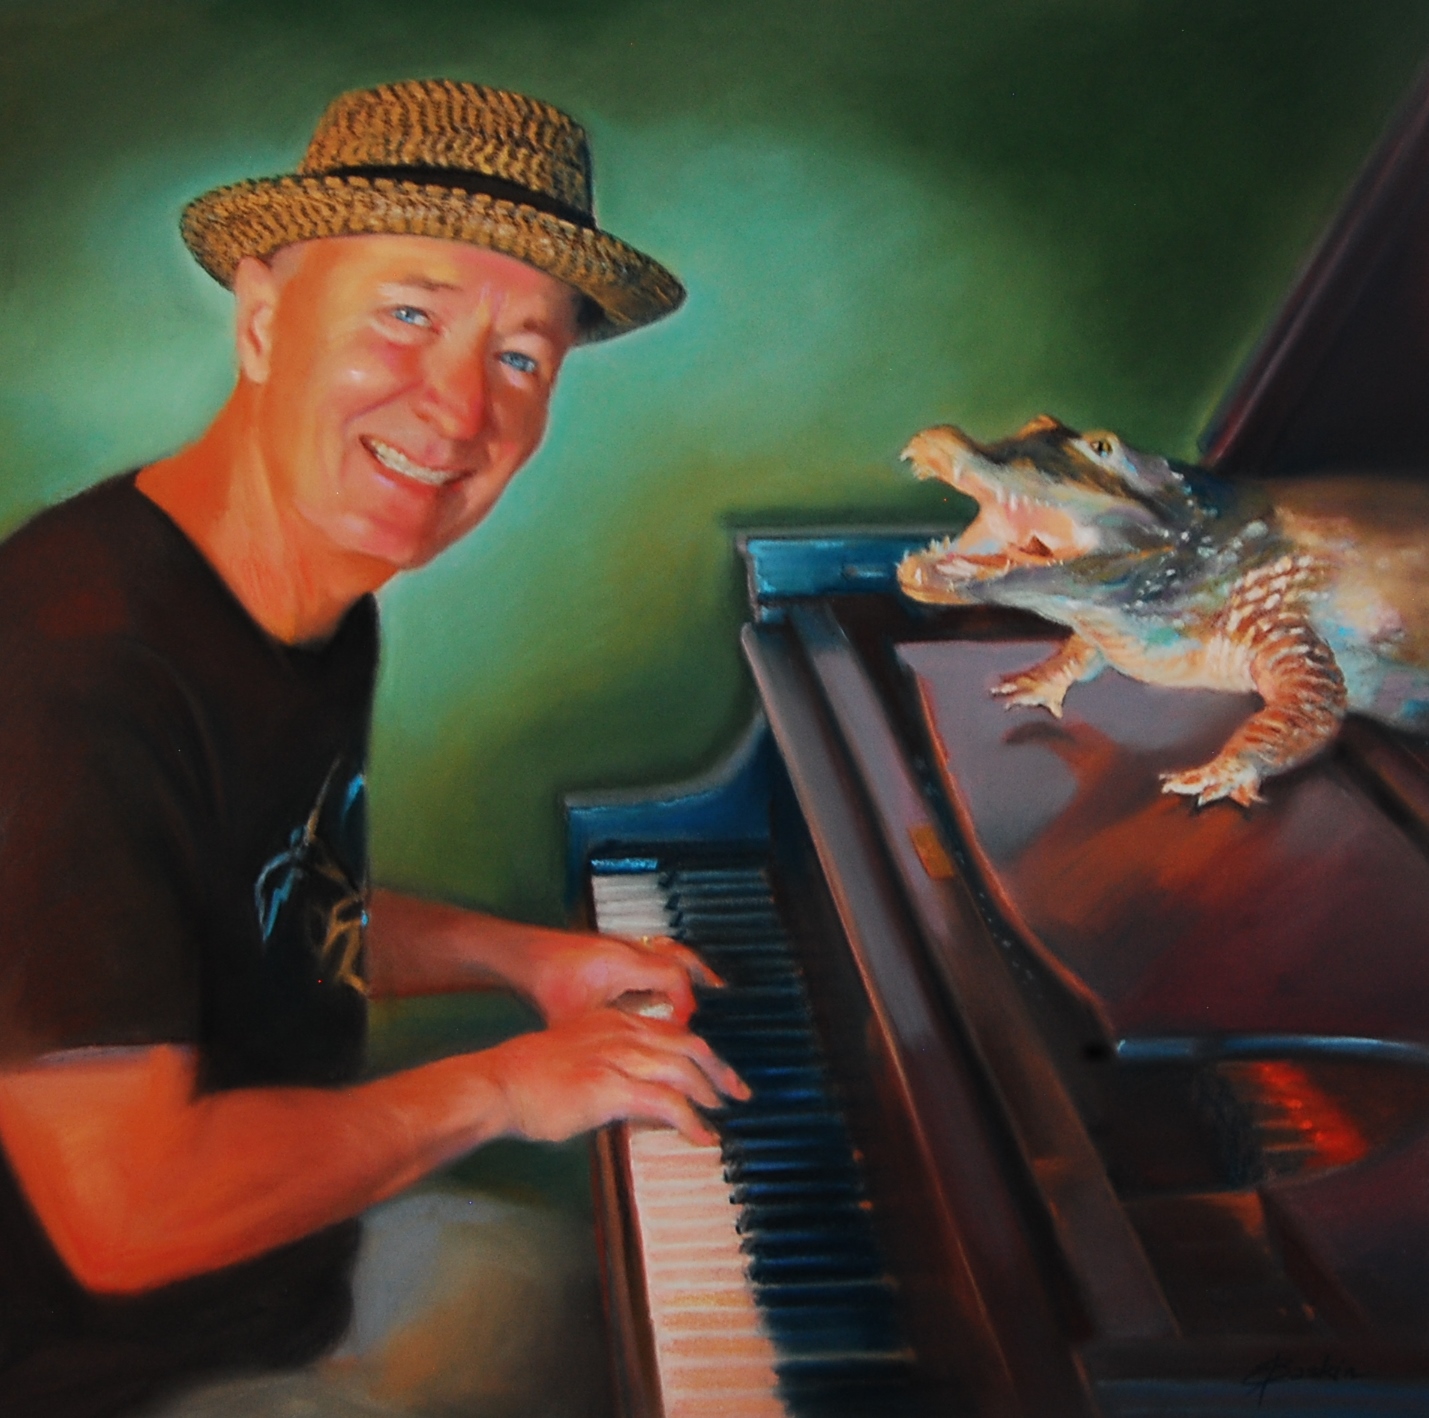   “Phil Dutton and an Alligator”, pastel by E. Baskin, part of “Passion” series, 2017, 18”x24” (sold)  